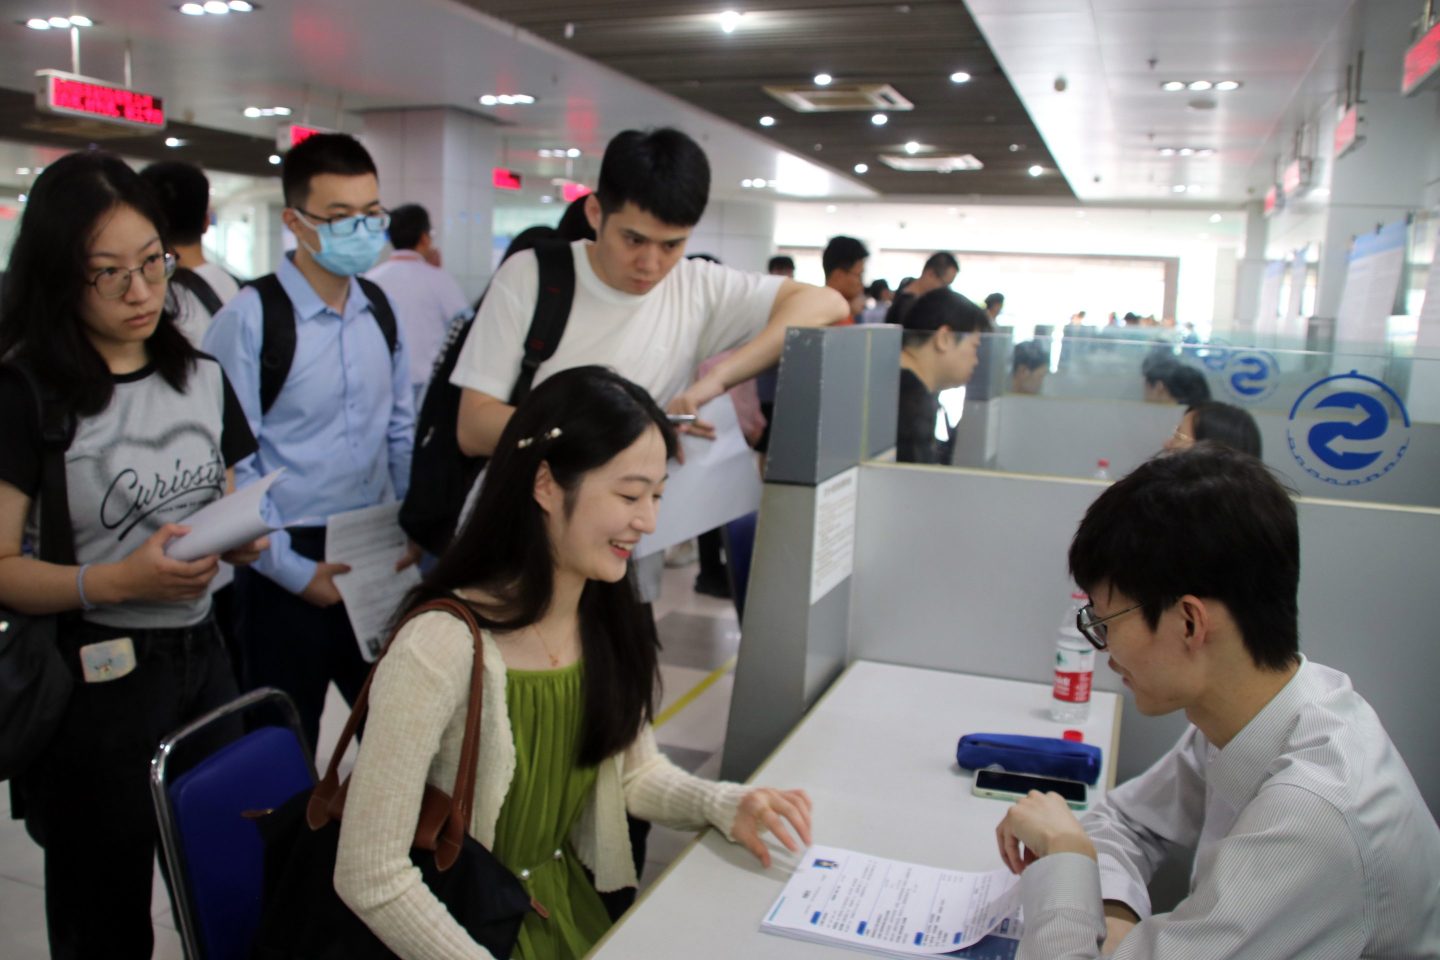 Job seekers look for positions at the 2023 Summer college Graduates Employment and Internship Fair in Suqian, Jiangsu Province, China, Aug. 9, 2023. (Photo by Costfoto/NurPhoto via Getty Images)